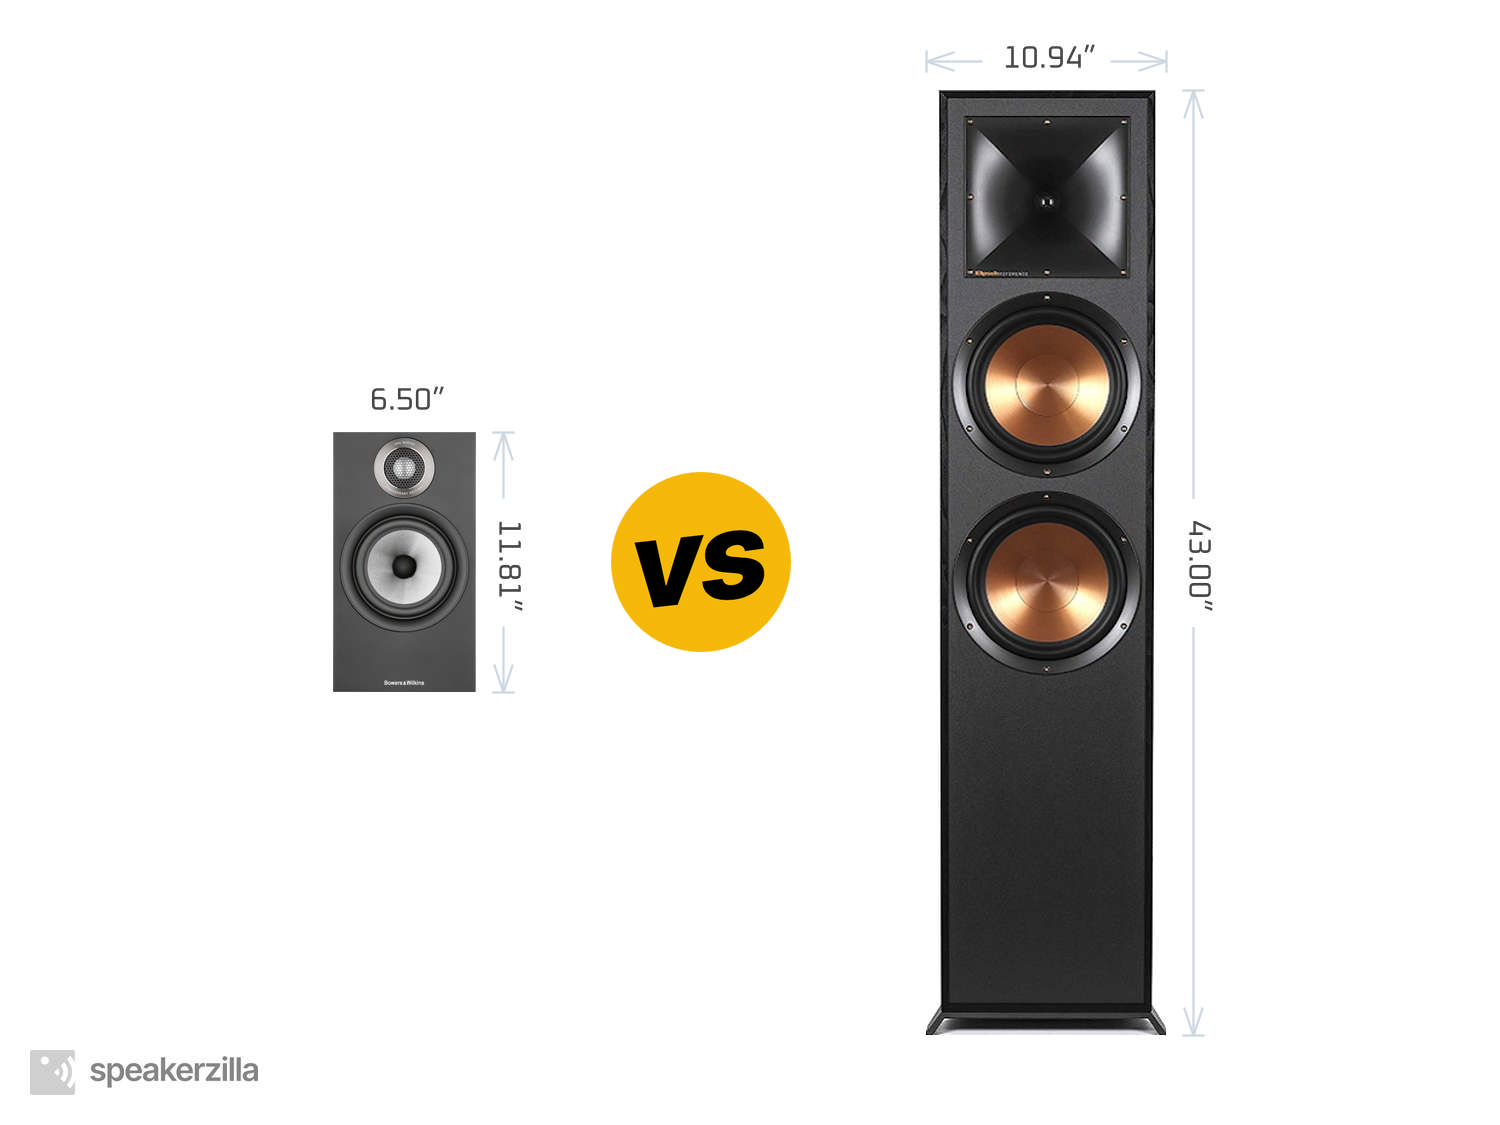 Bowers & Wilkins 607 S2 Anniversary Edition Speakers vs. Klipsch Reference R-820F Tower Speakers